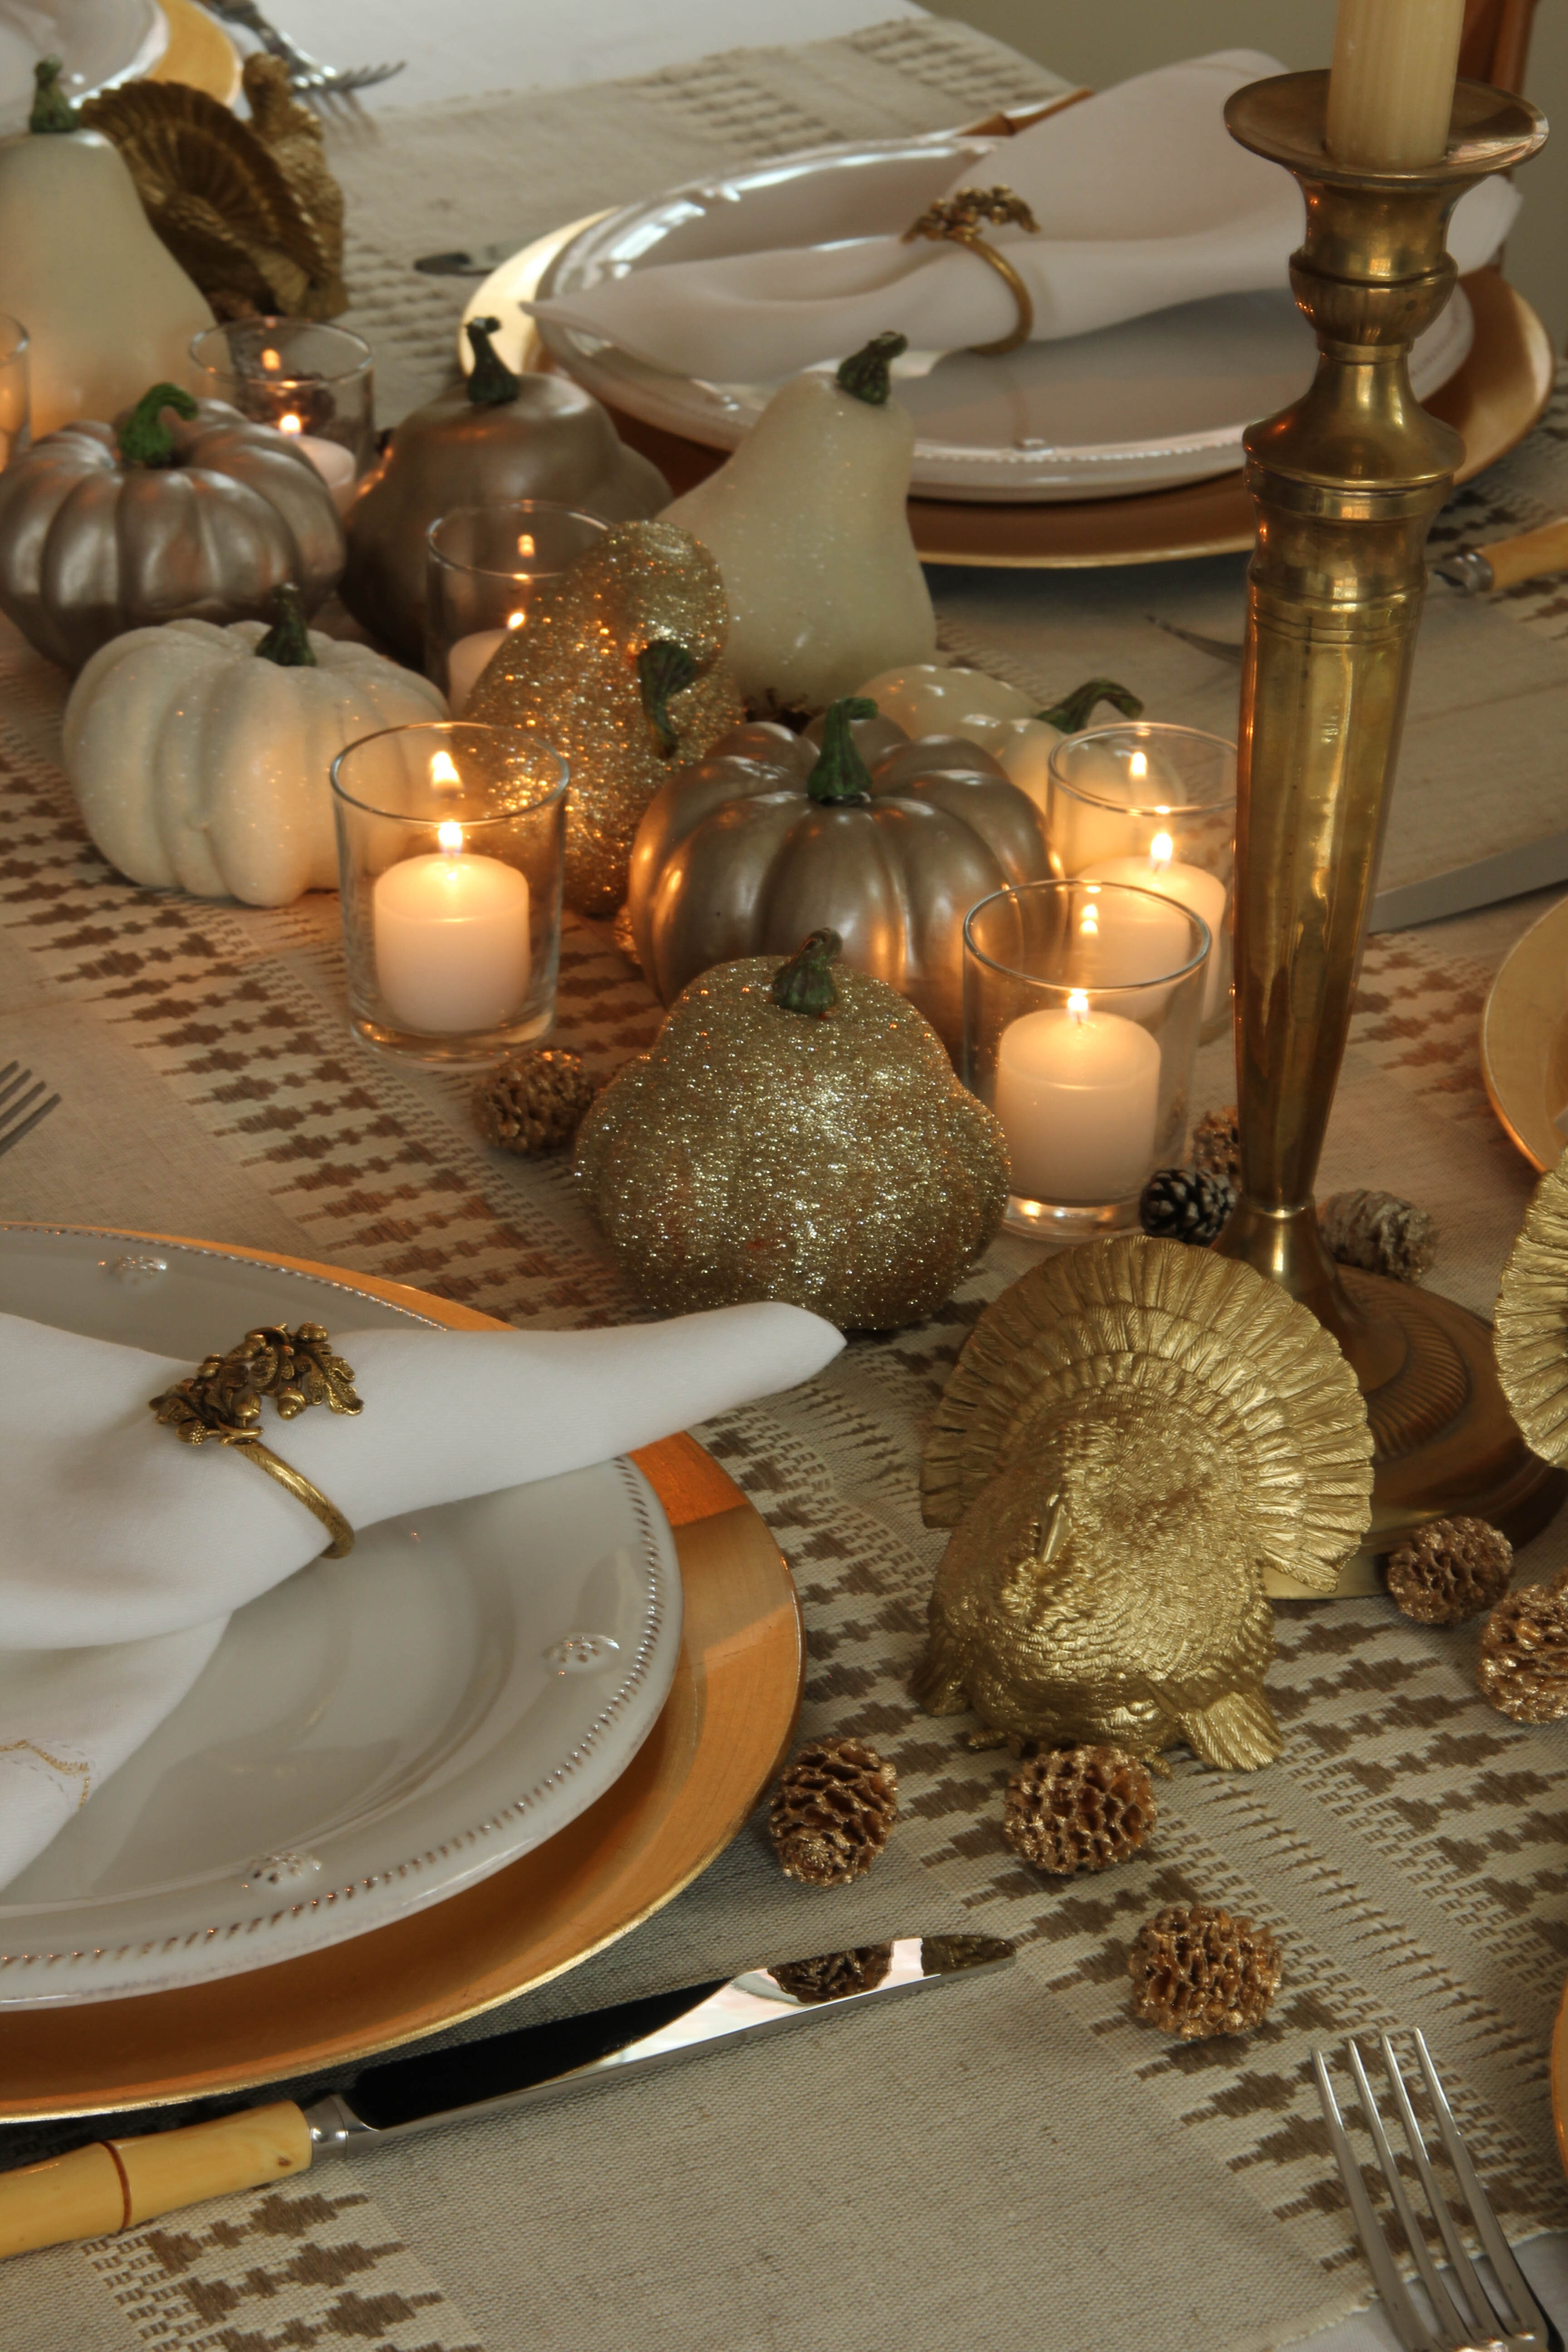 Recreate my Thanksgiving table with these easy DIY metallic and glitter gourds. Setting the table was so much fun and it looks so festive!